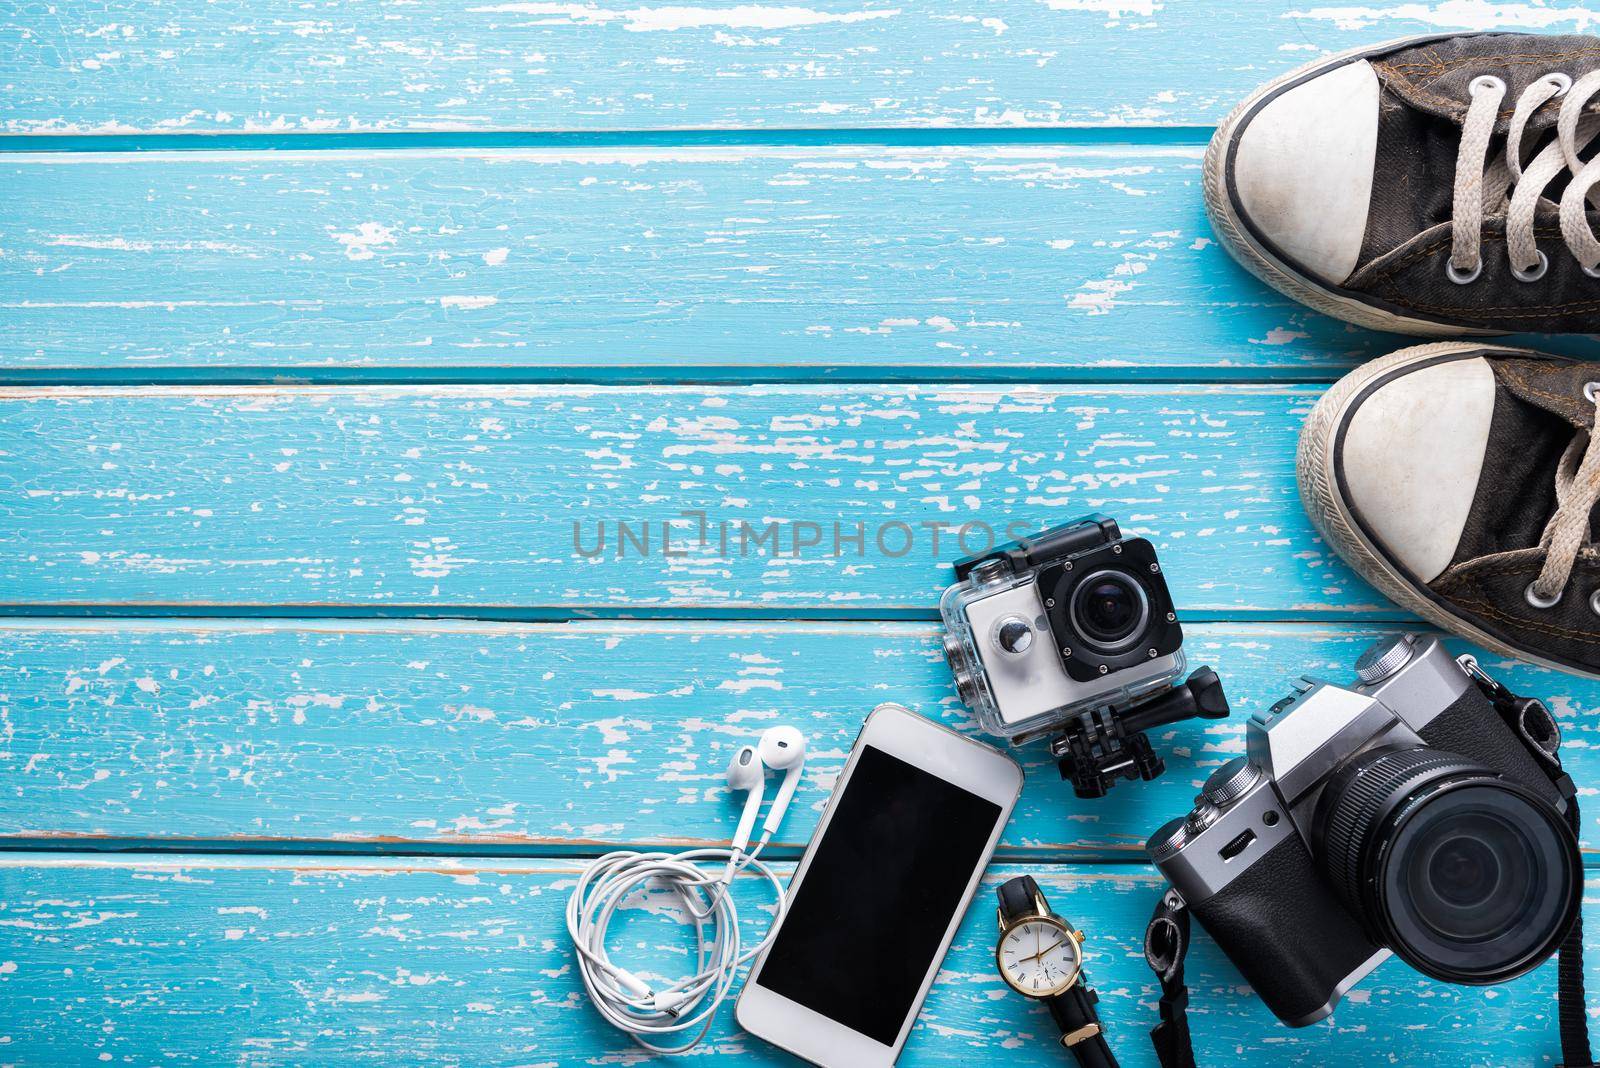 Top view of Traveler's accessories, Flat lay photography of Travel concept on blue background